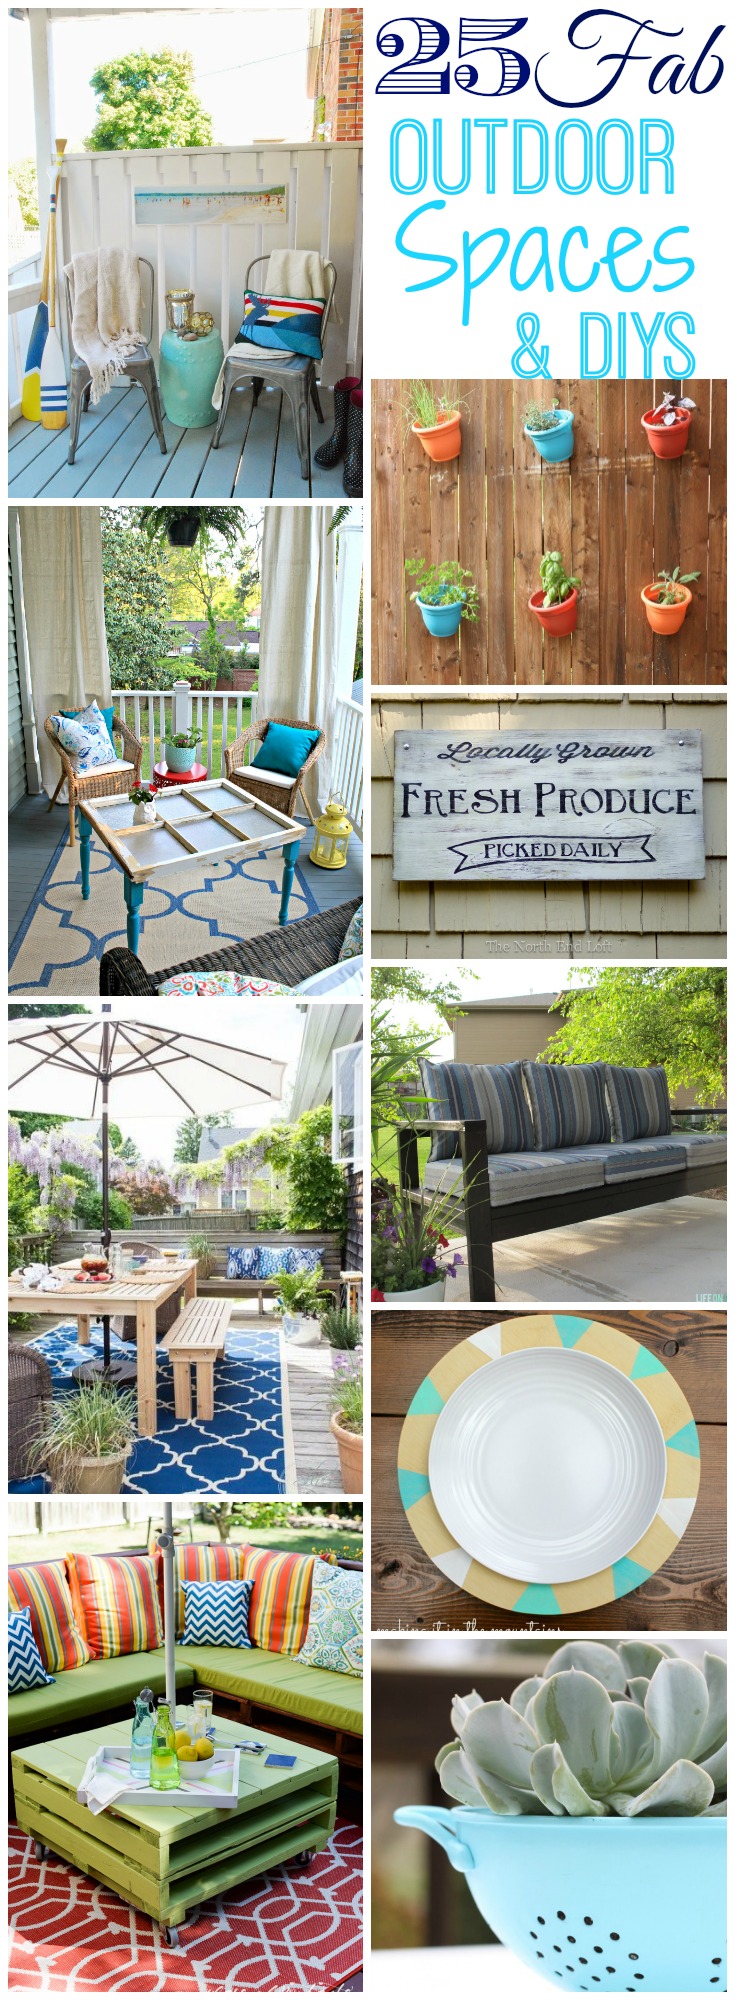 Get totally inspired for summer with these 25 fabulous outdoor spaces and DIYs at thehappyhousie.com